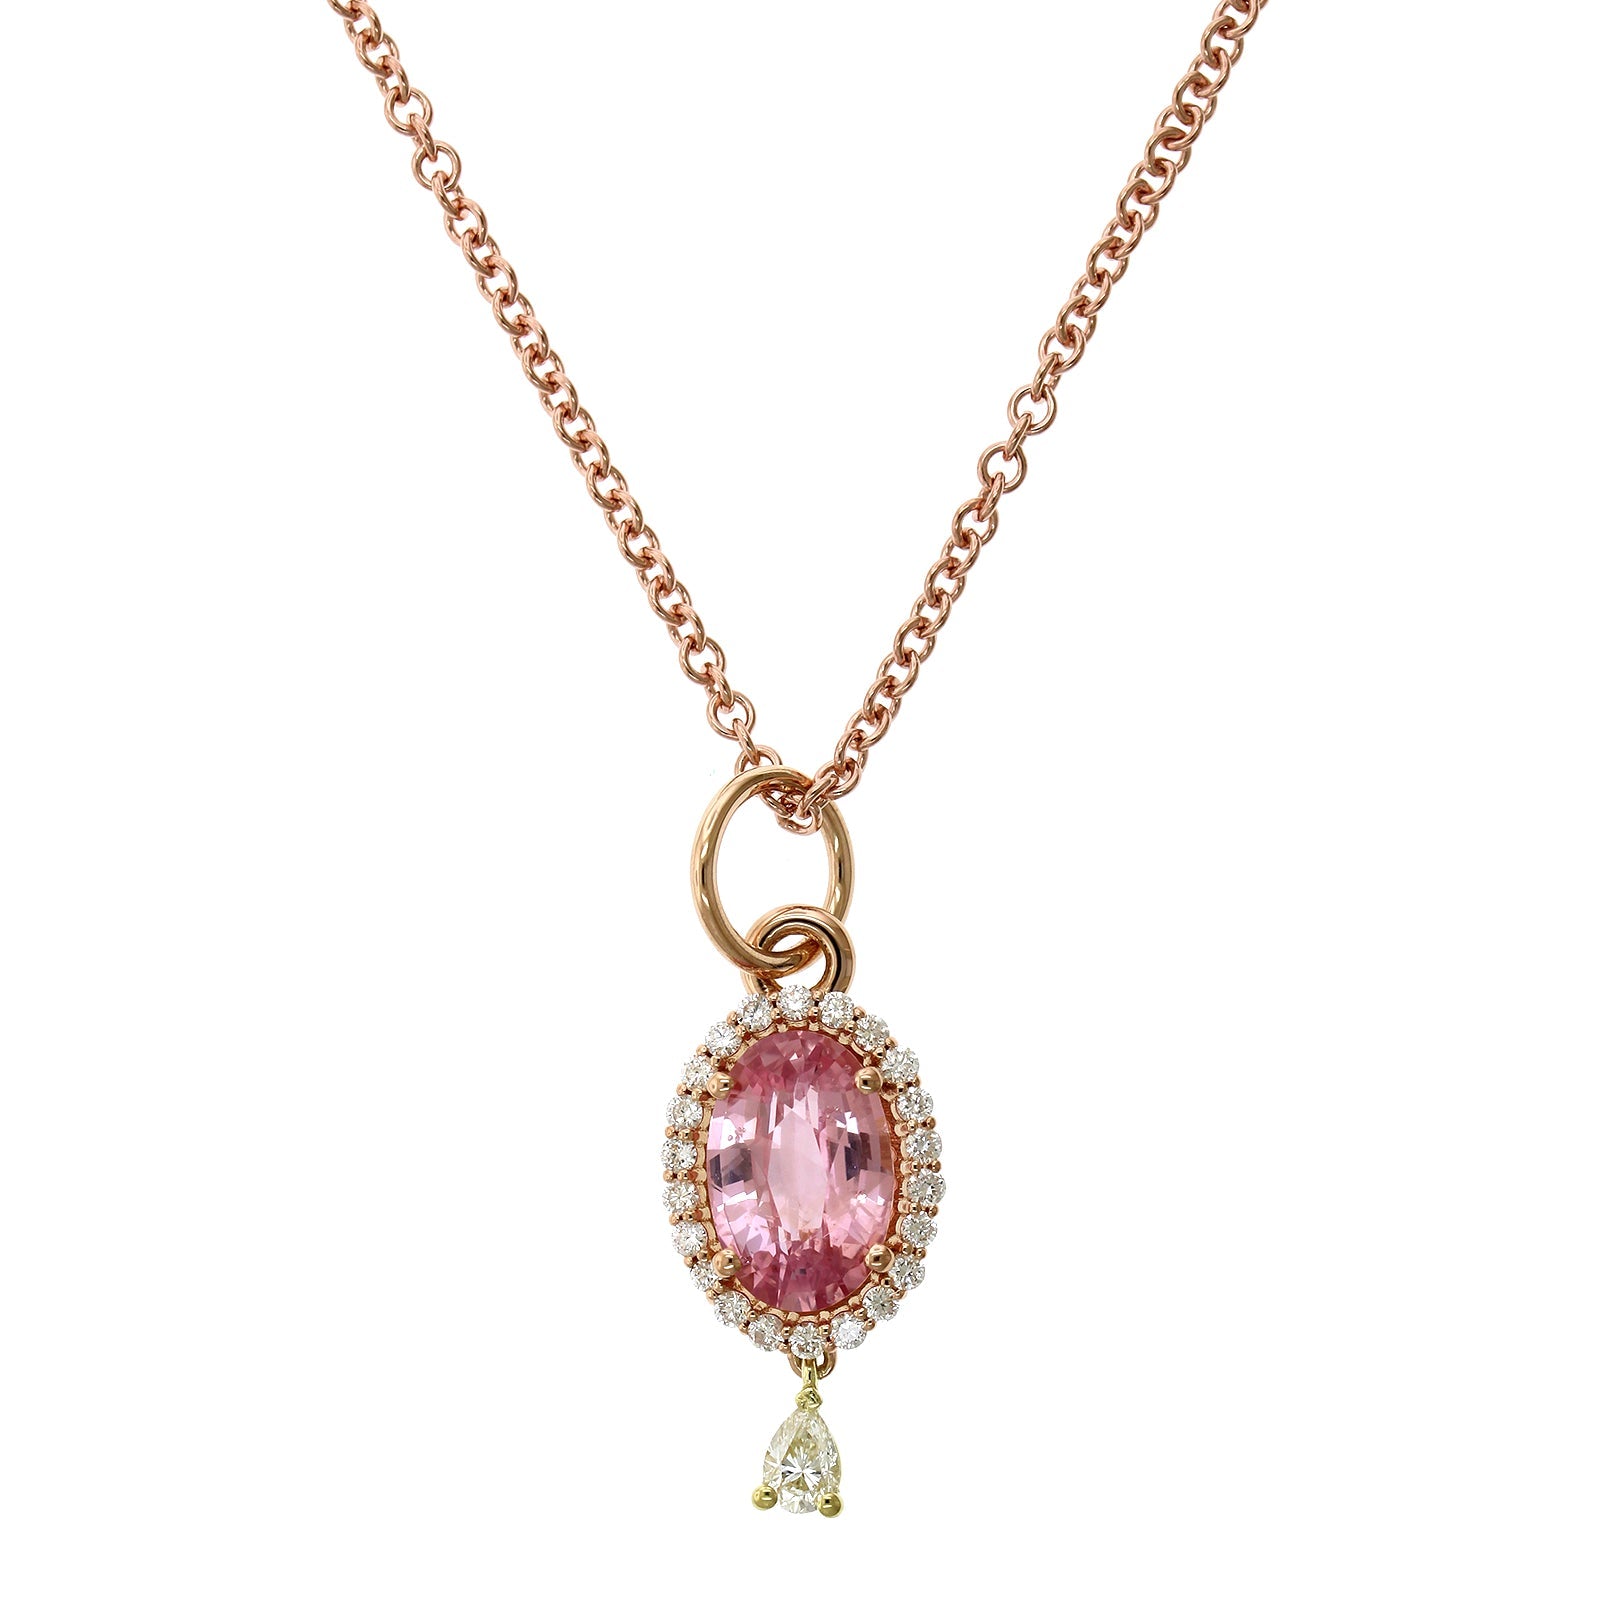 20K Rose Gold Oval Padparadscha Sapphire Diamond Pendant, 20k rose and 18k yellow gold, Long's Jewelers